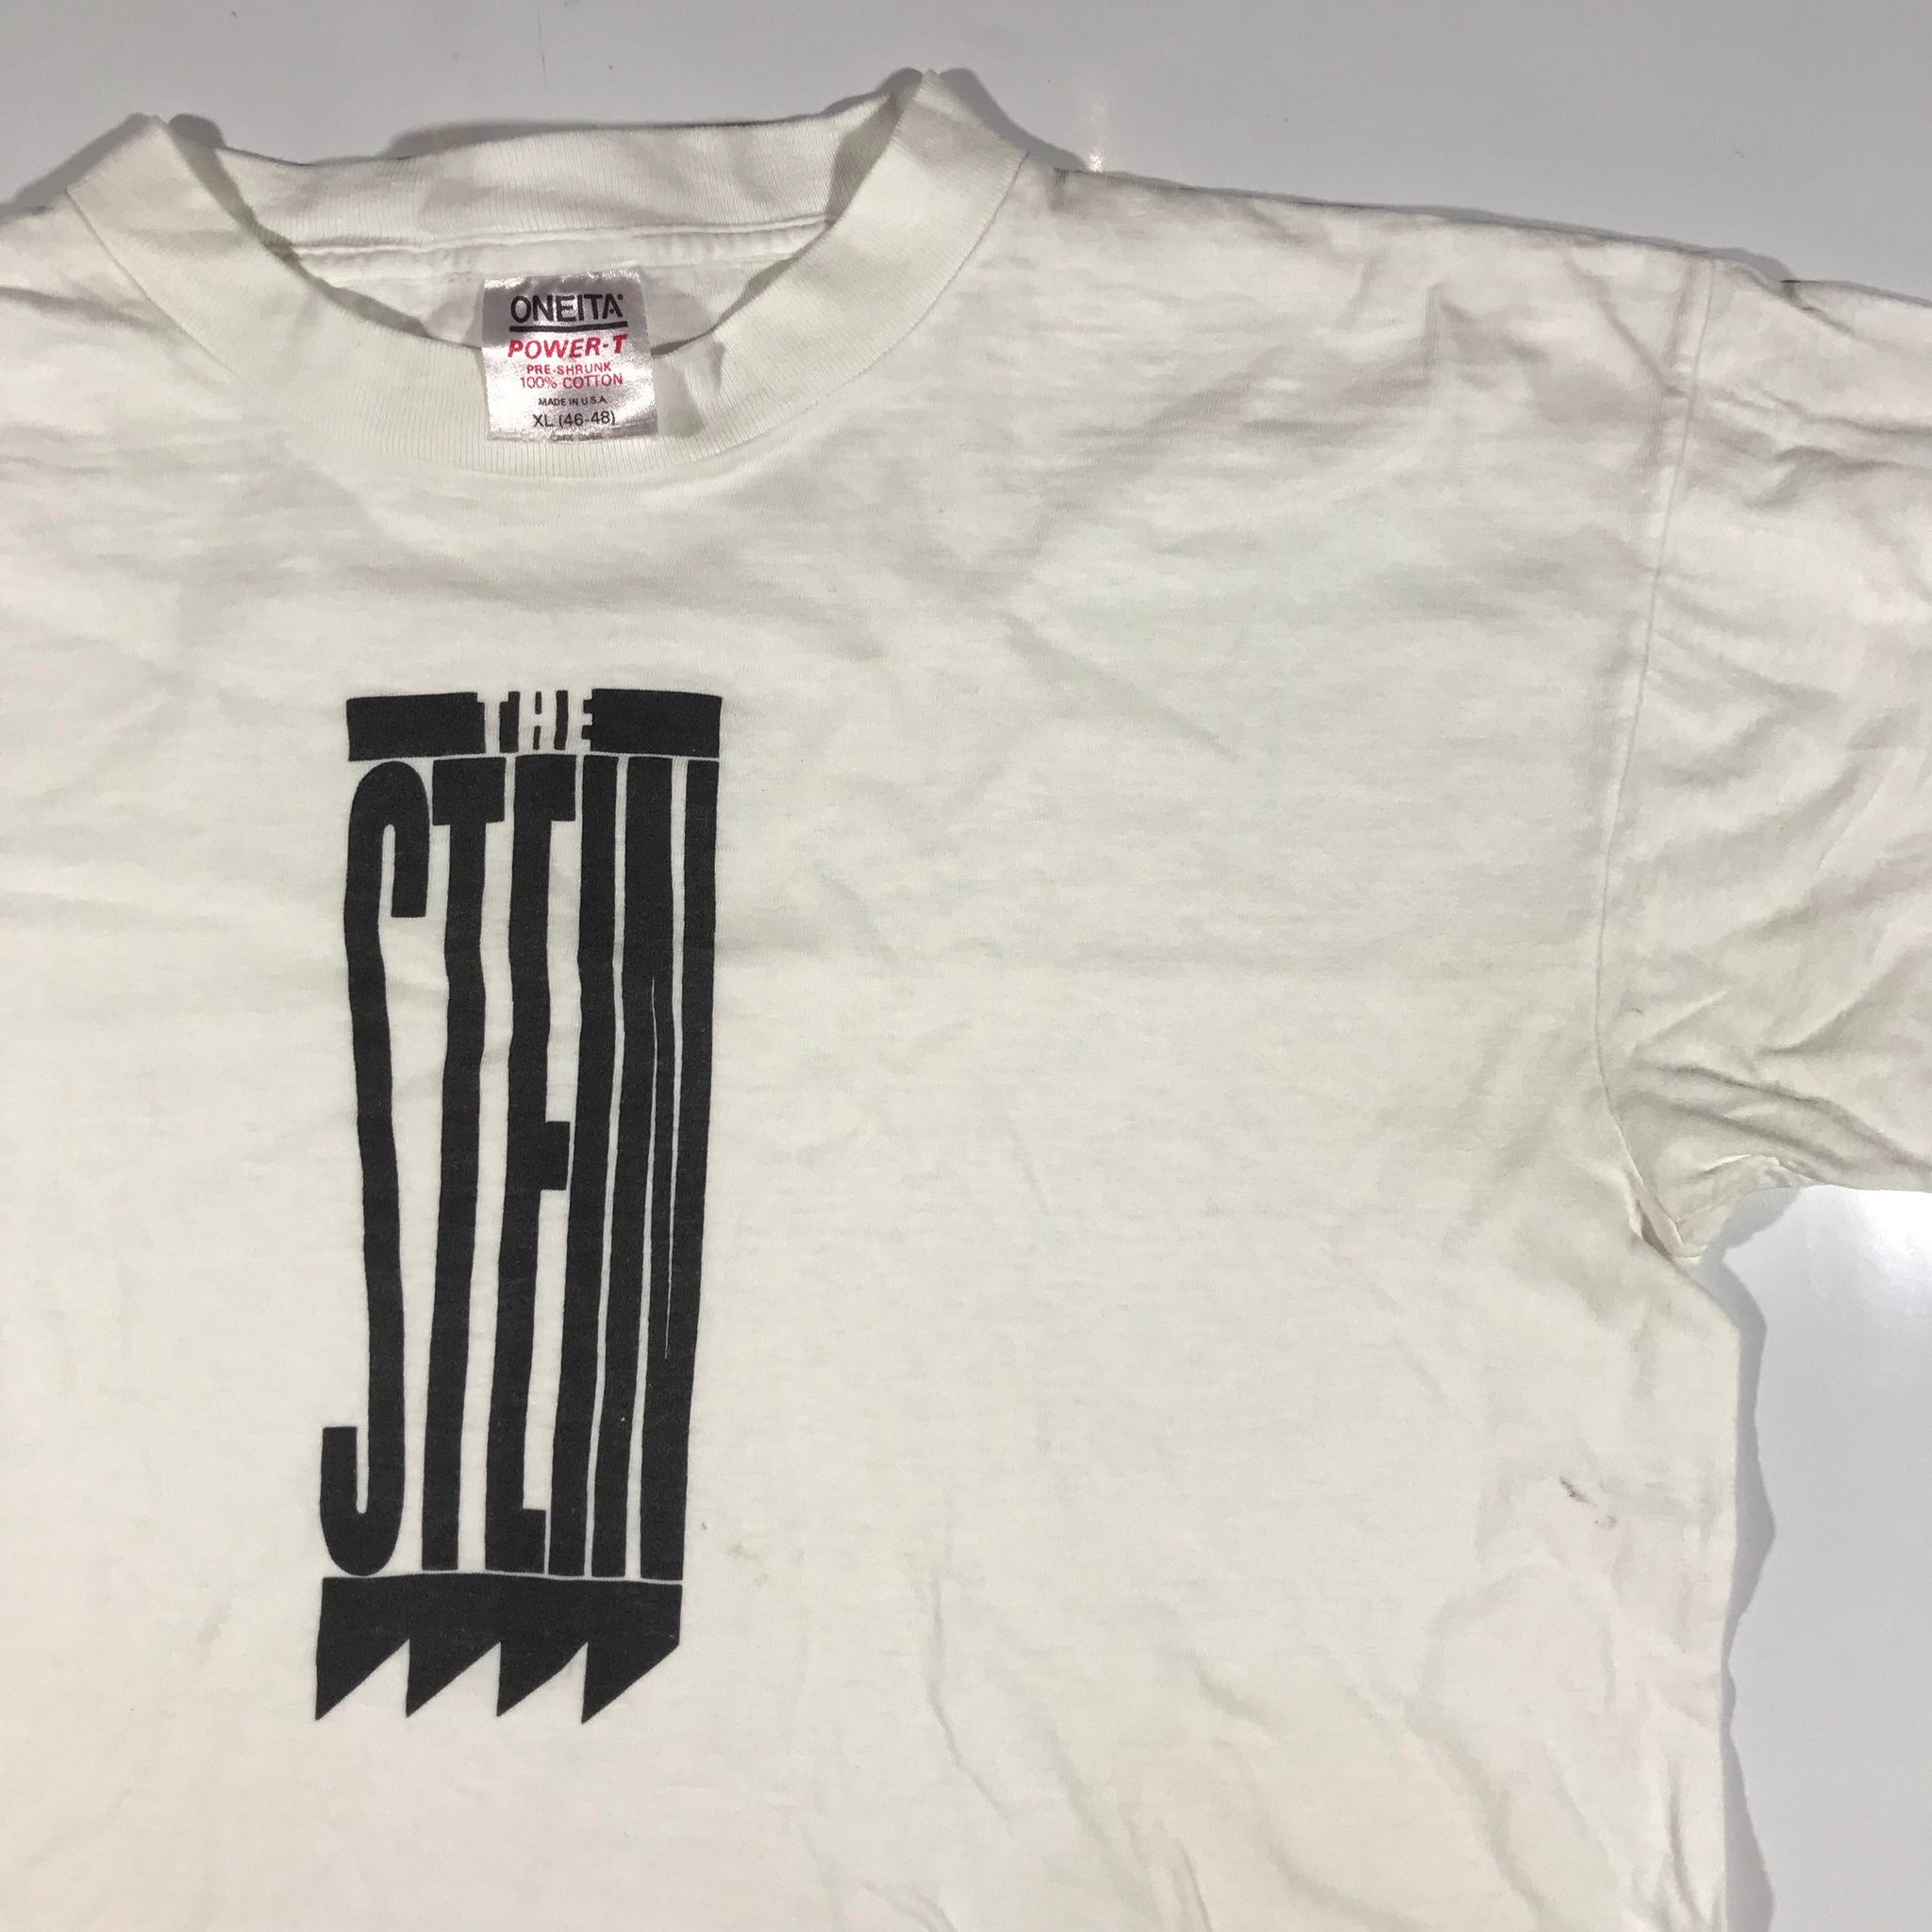 90s The Stein tee. Large fit